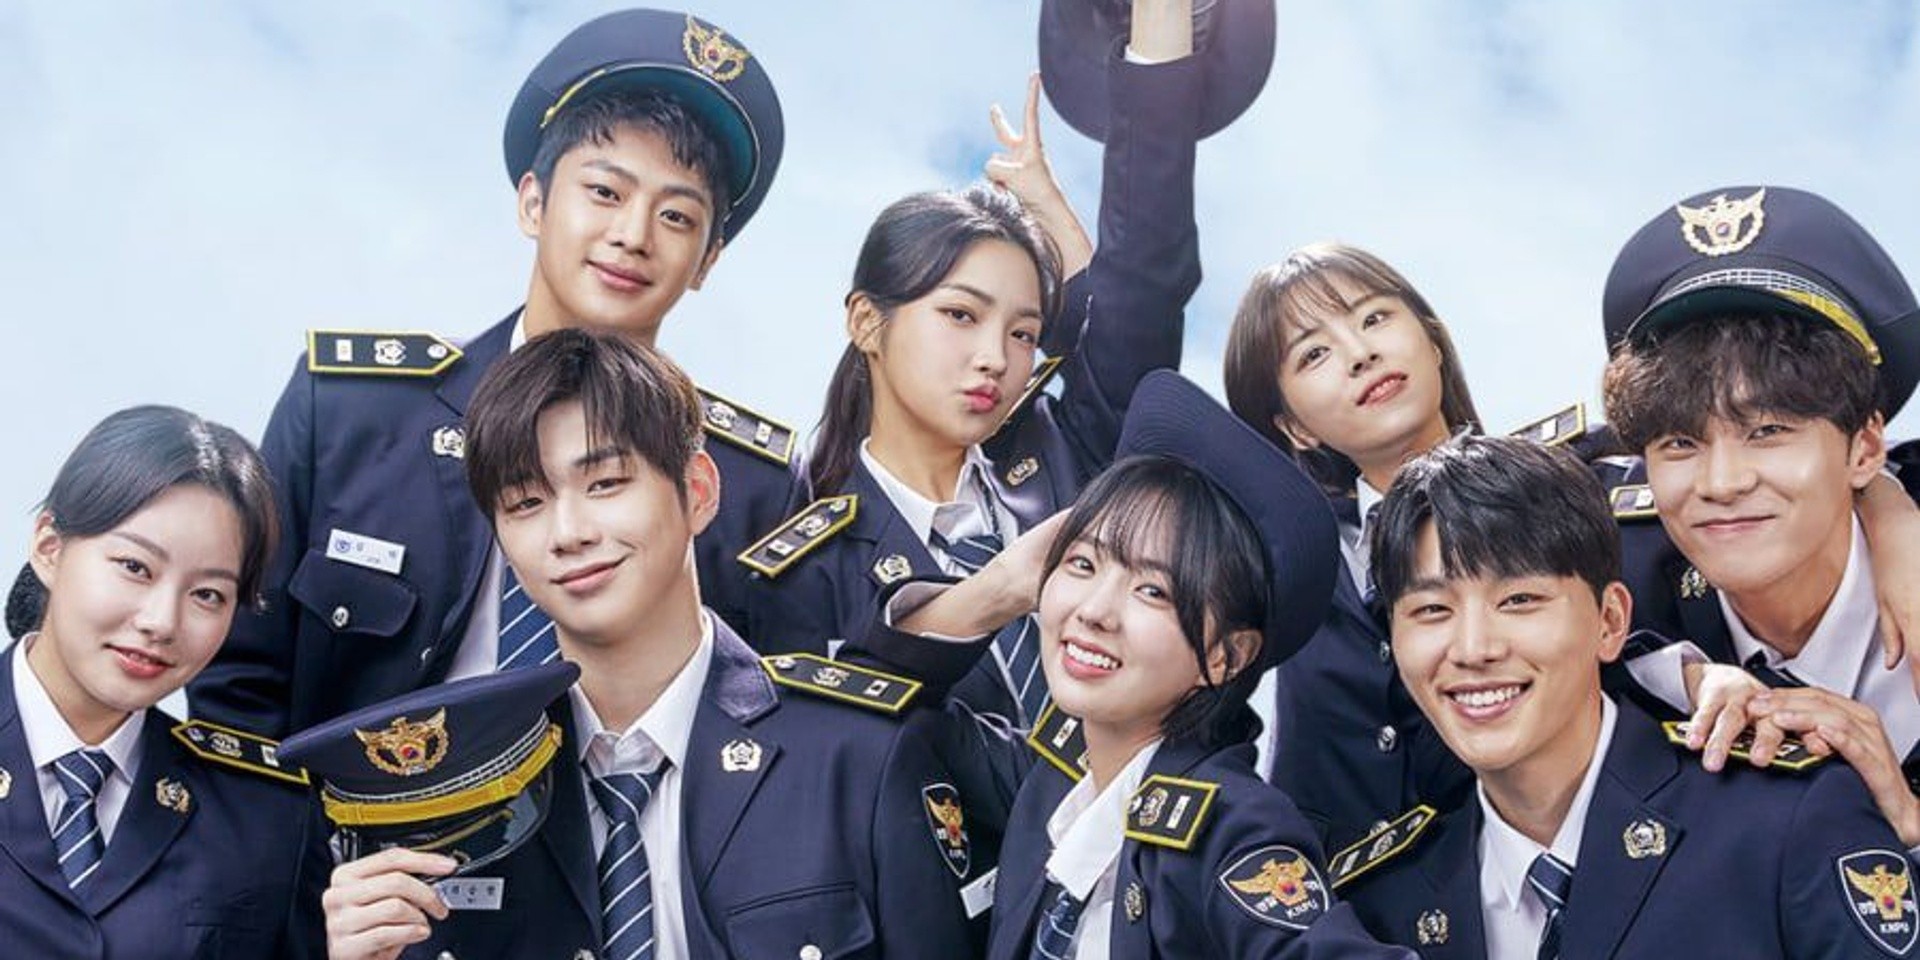 Coming-of-age K-drama 'Rookie Cops' starring Kang Daniel and Chae SooBin set to make its debut on Disney+